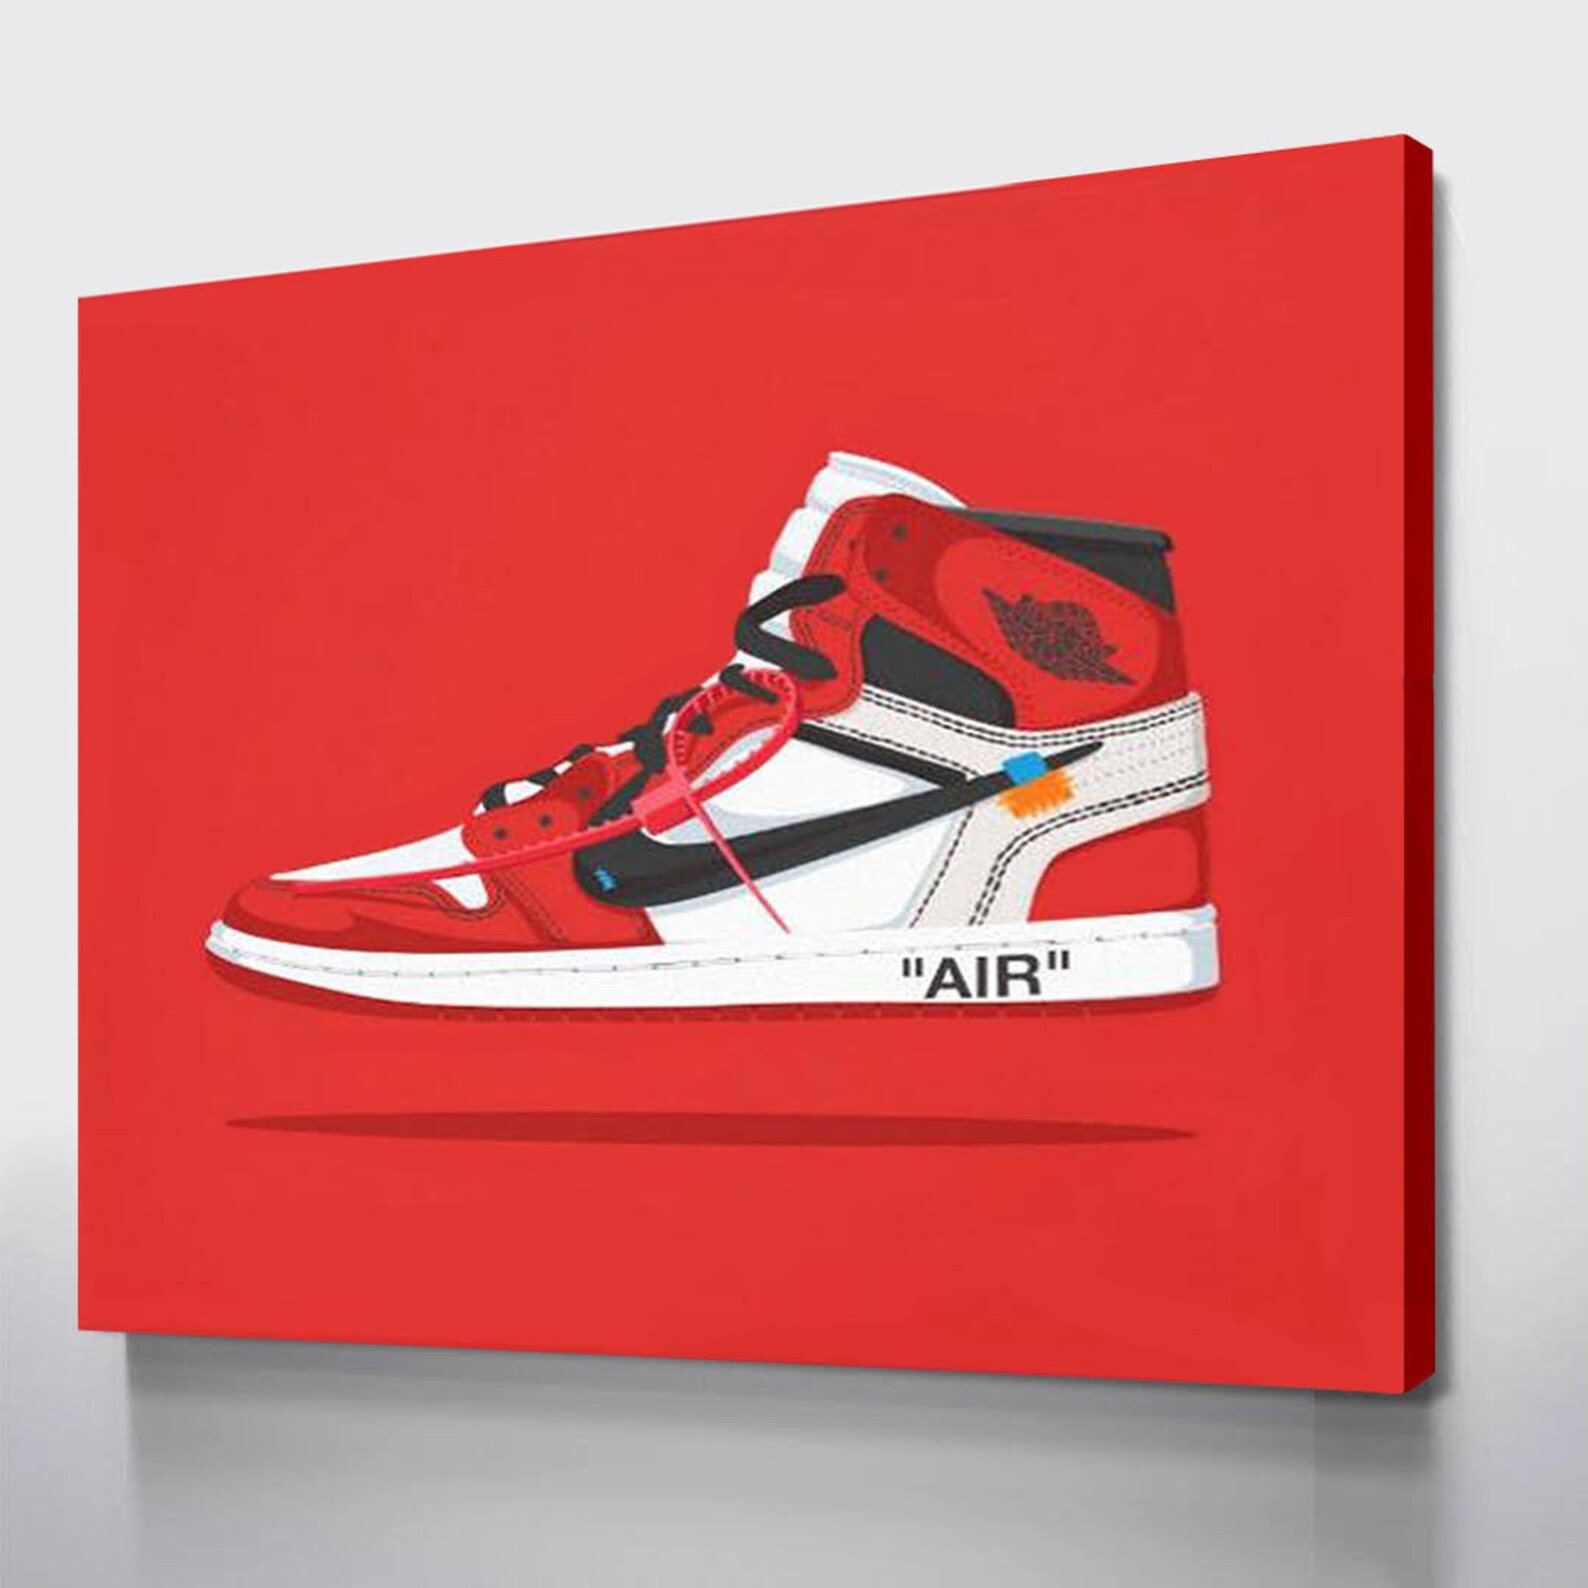 Red Nike AIR Wall Art Collection for Home Office Free Shipping | Etsy